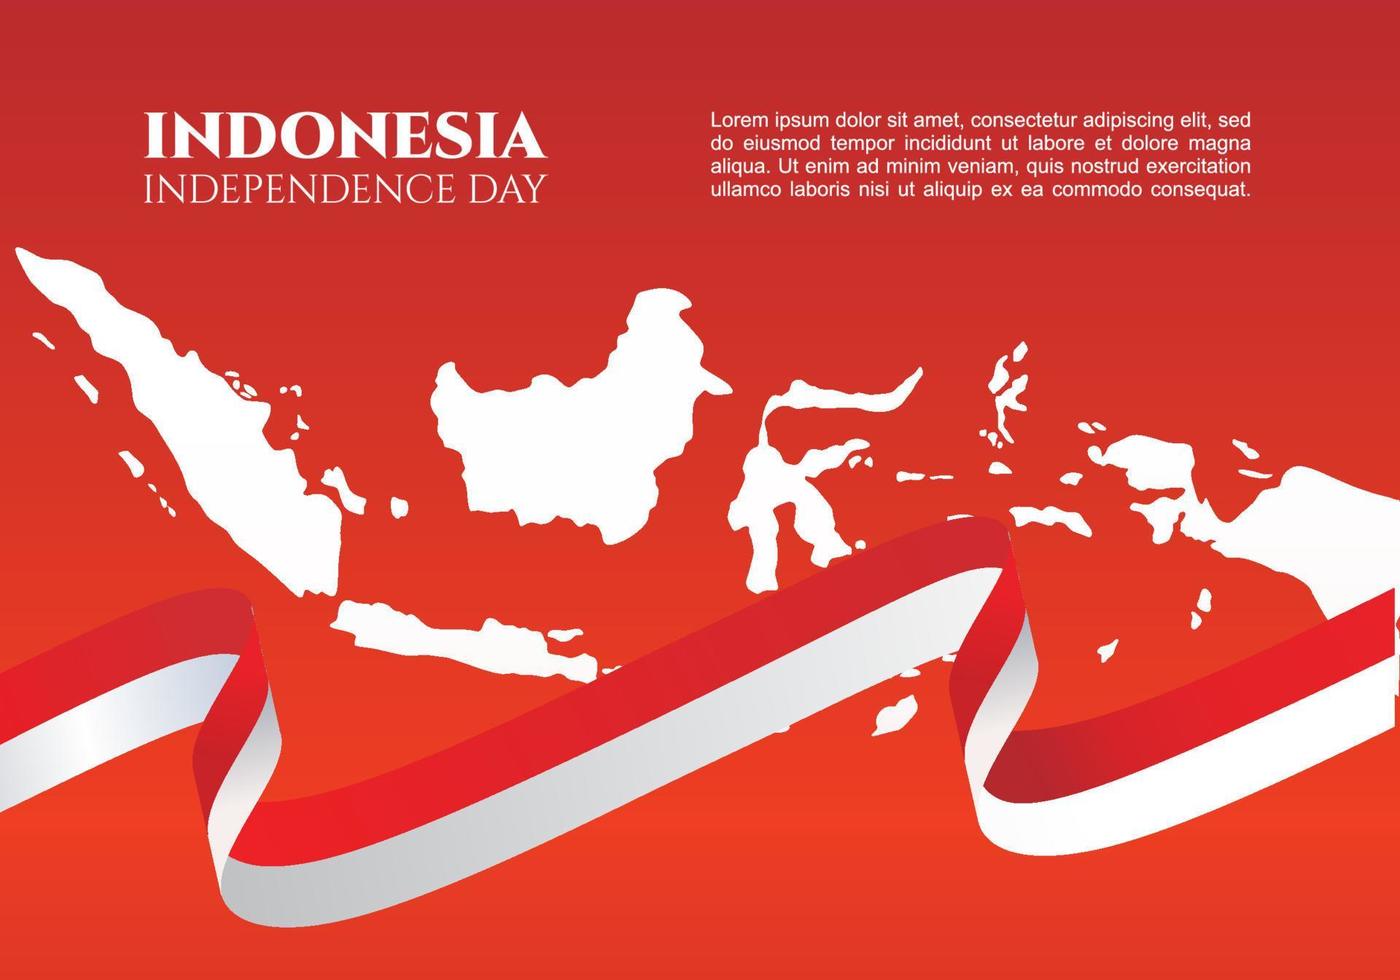 Indonesia independence day background celebration on august 17 th. vector